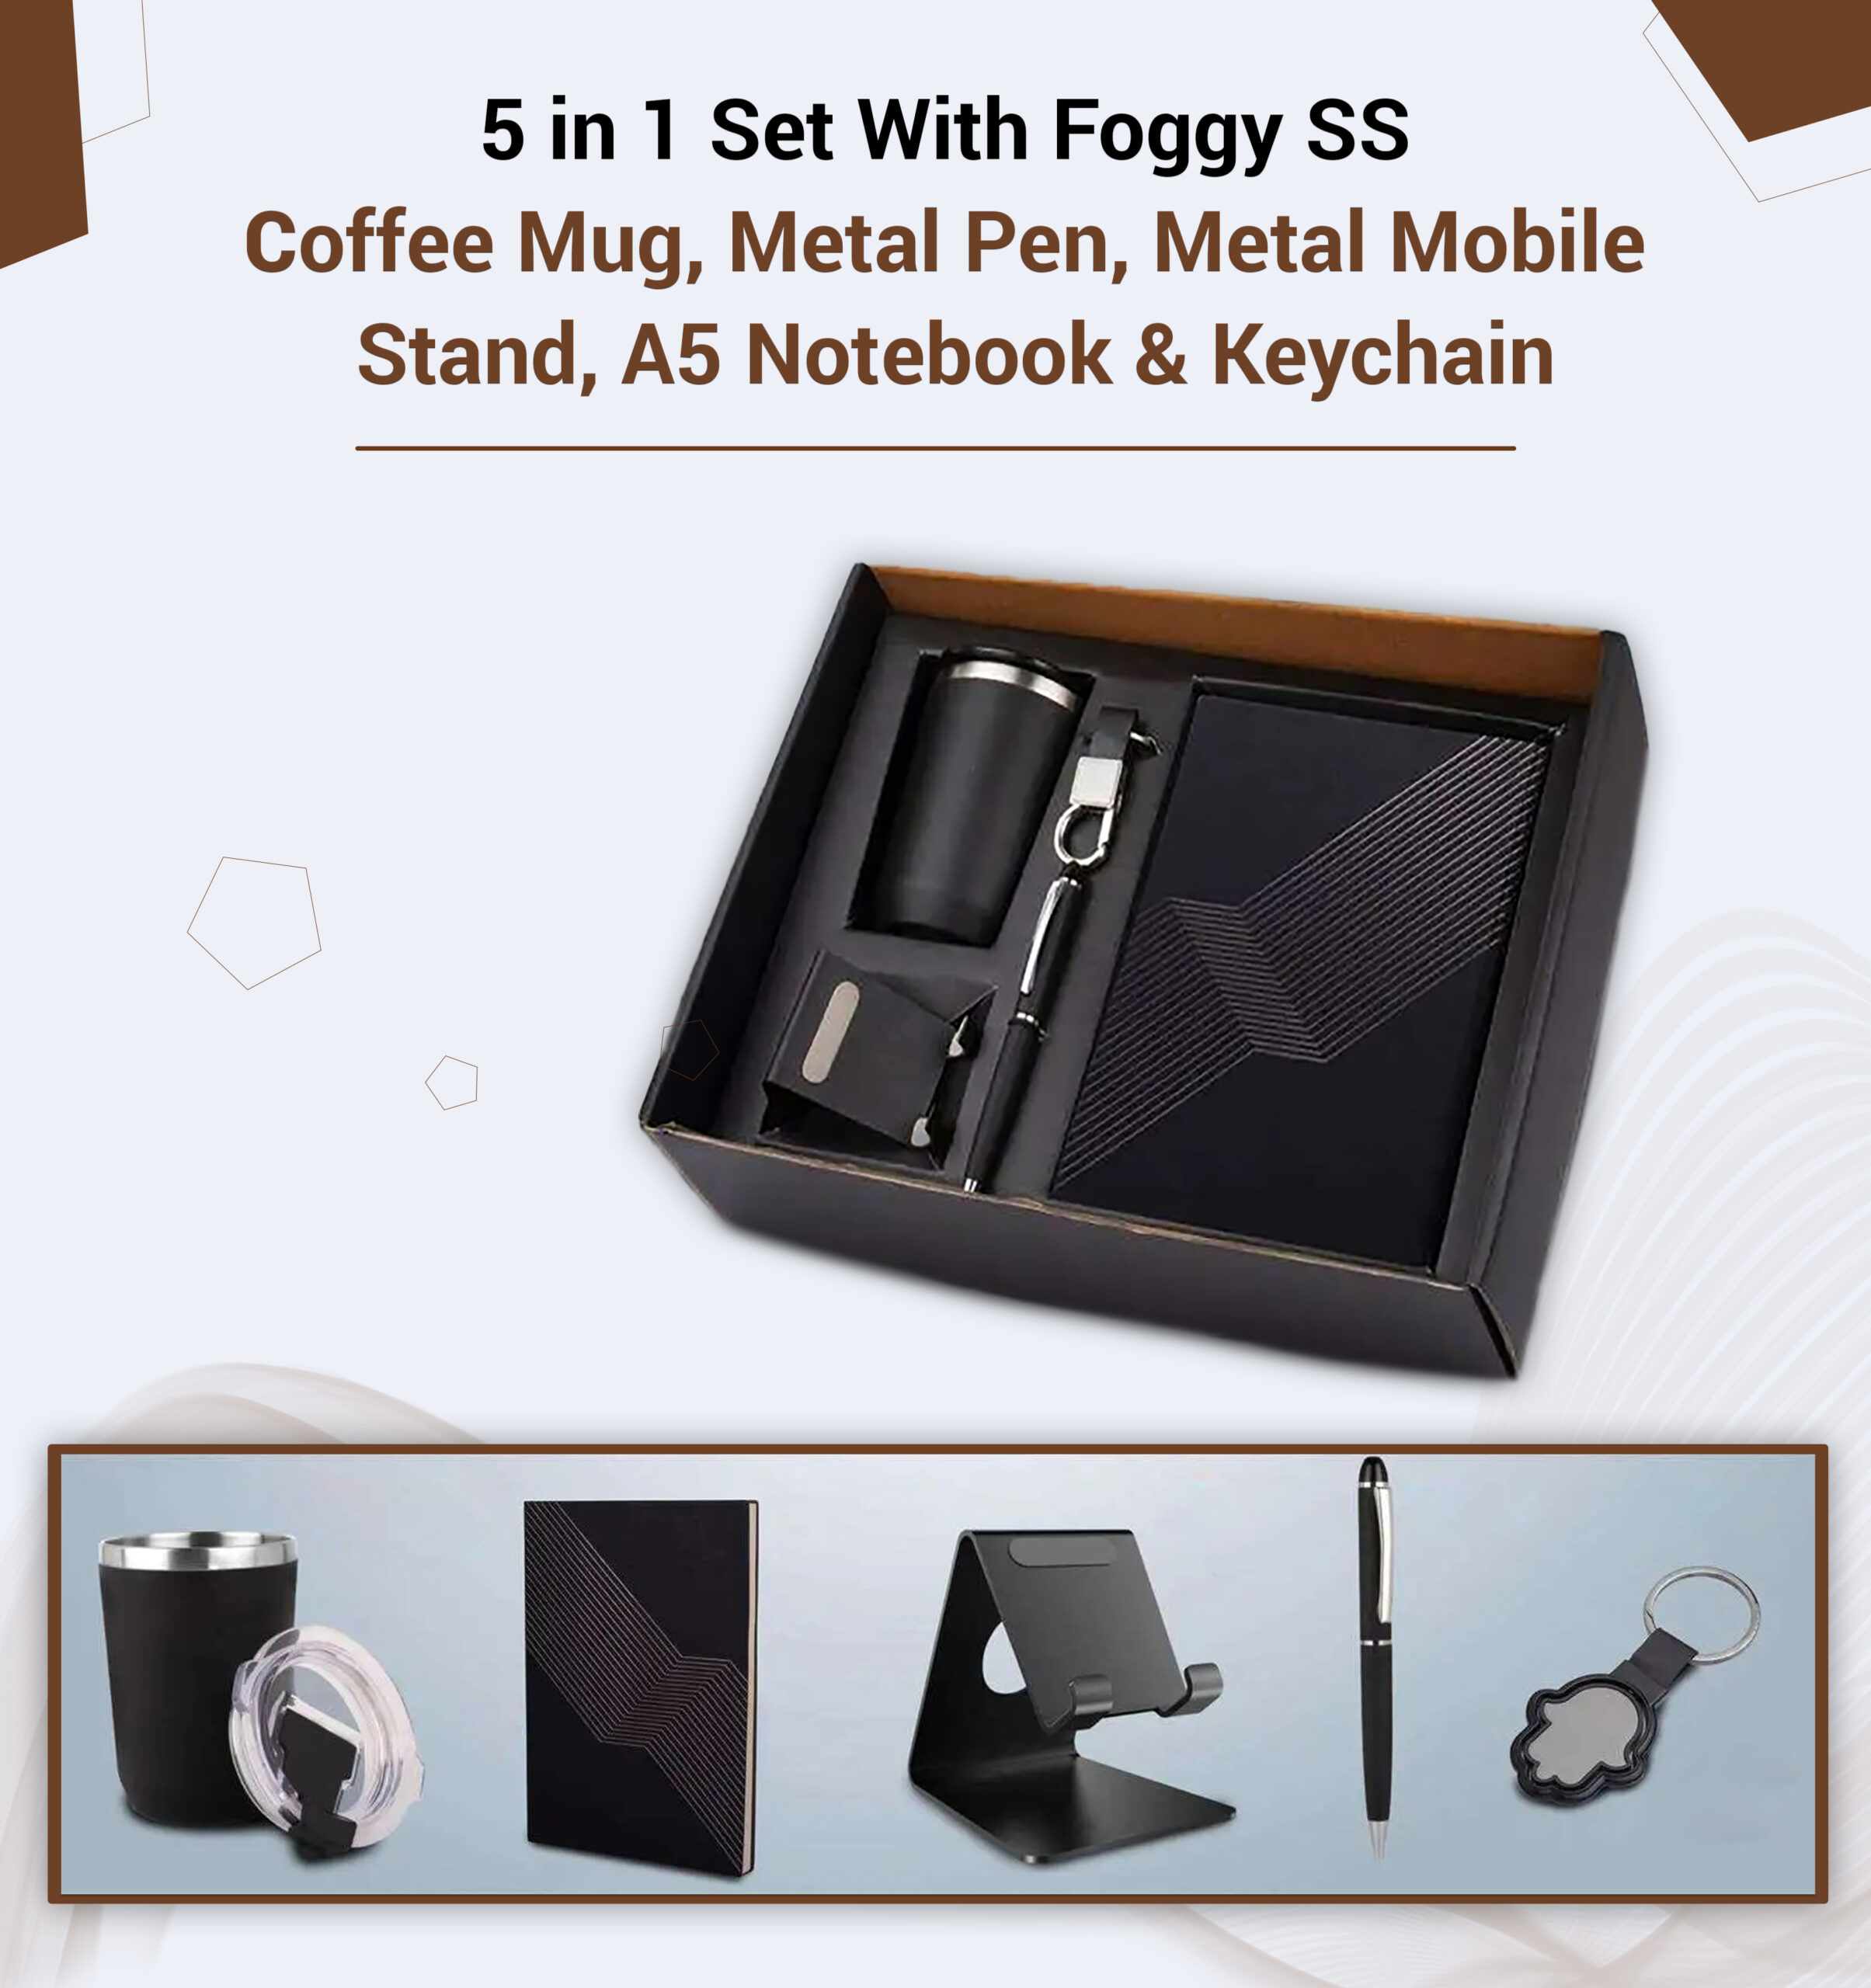 5 in 1 Set With Foggy SS Coffee Mug, Metal Pen, Metal Mobile Stand, A5 Notebook & Keychain infographic